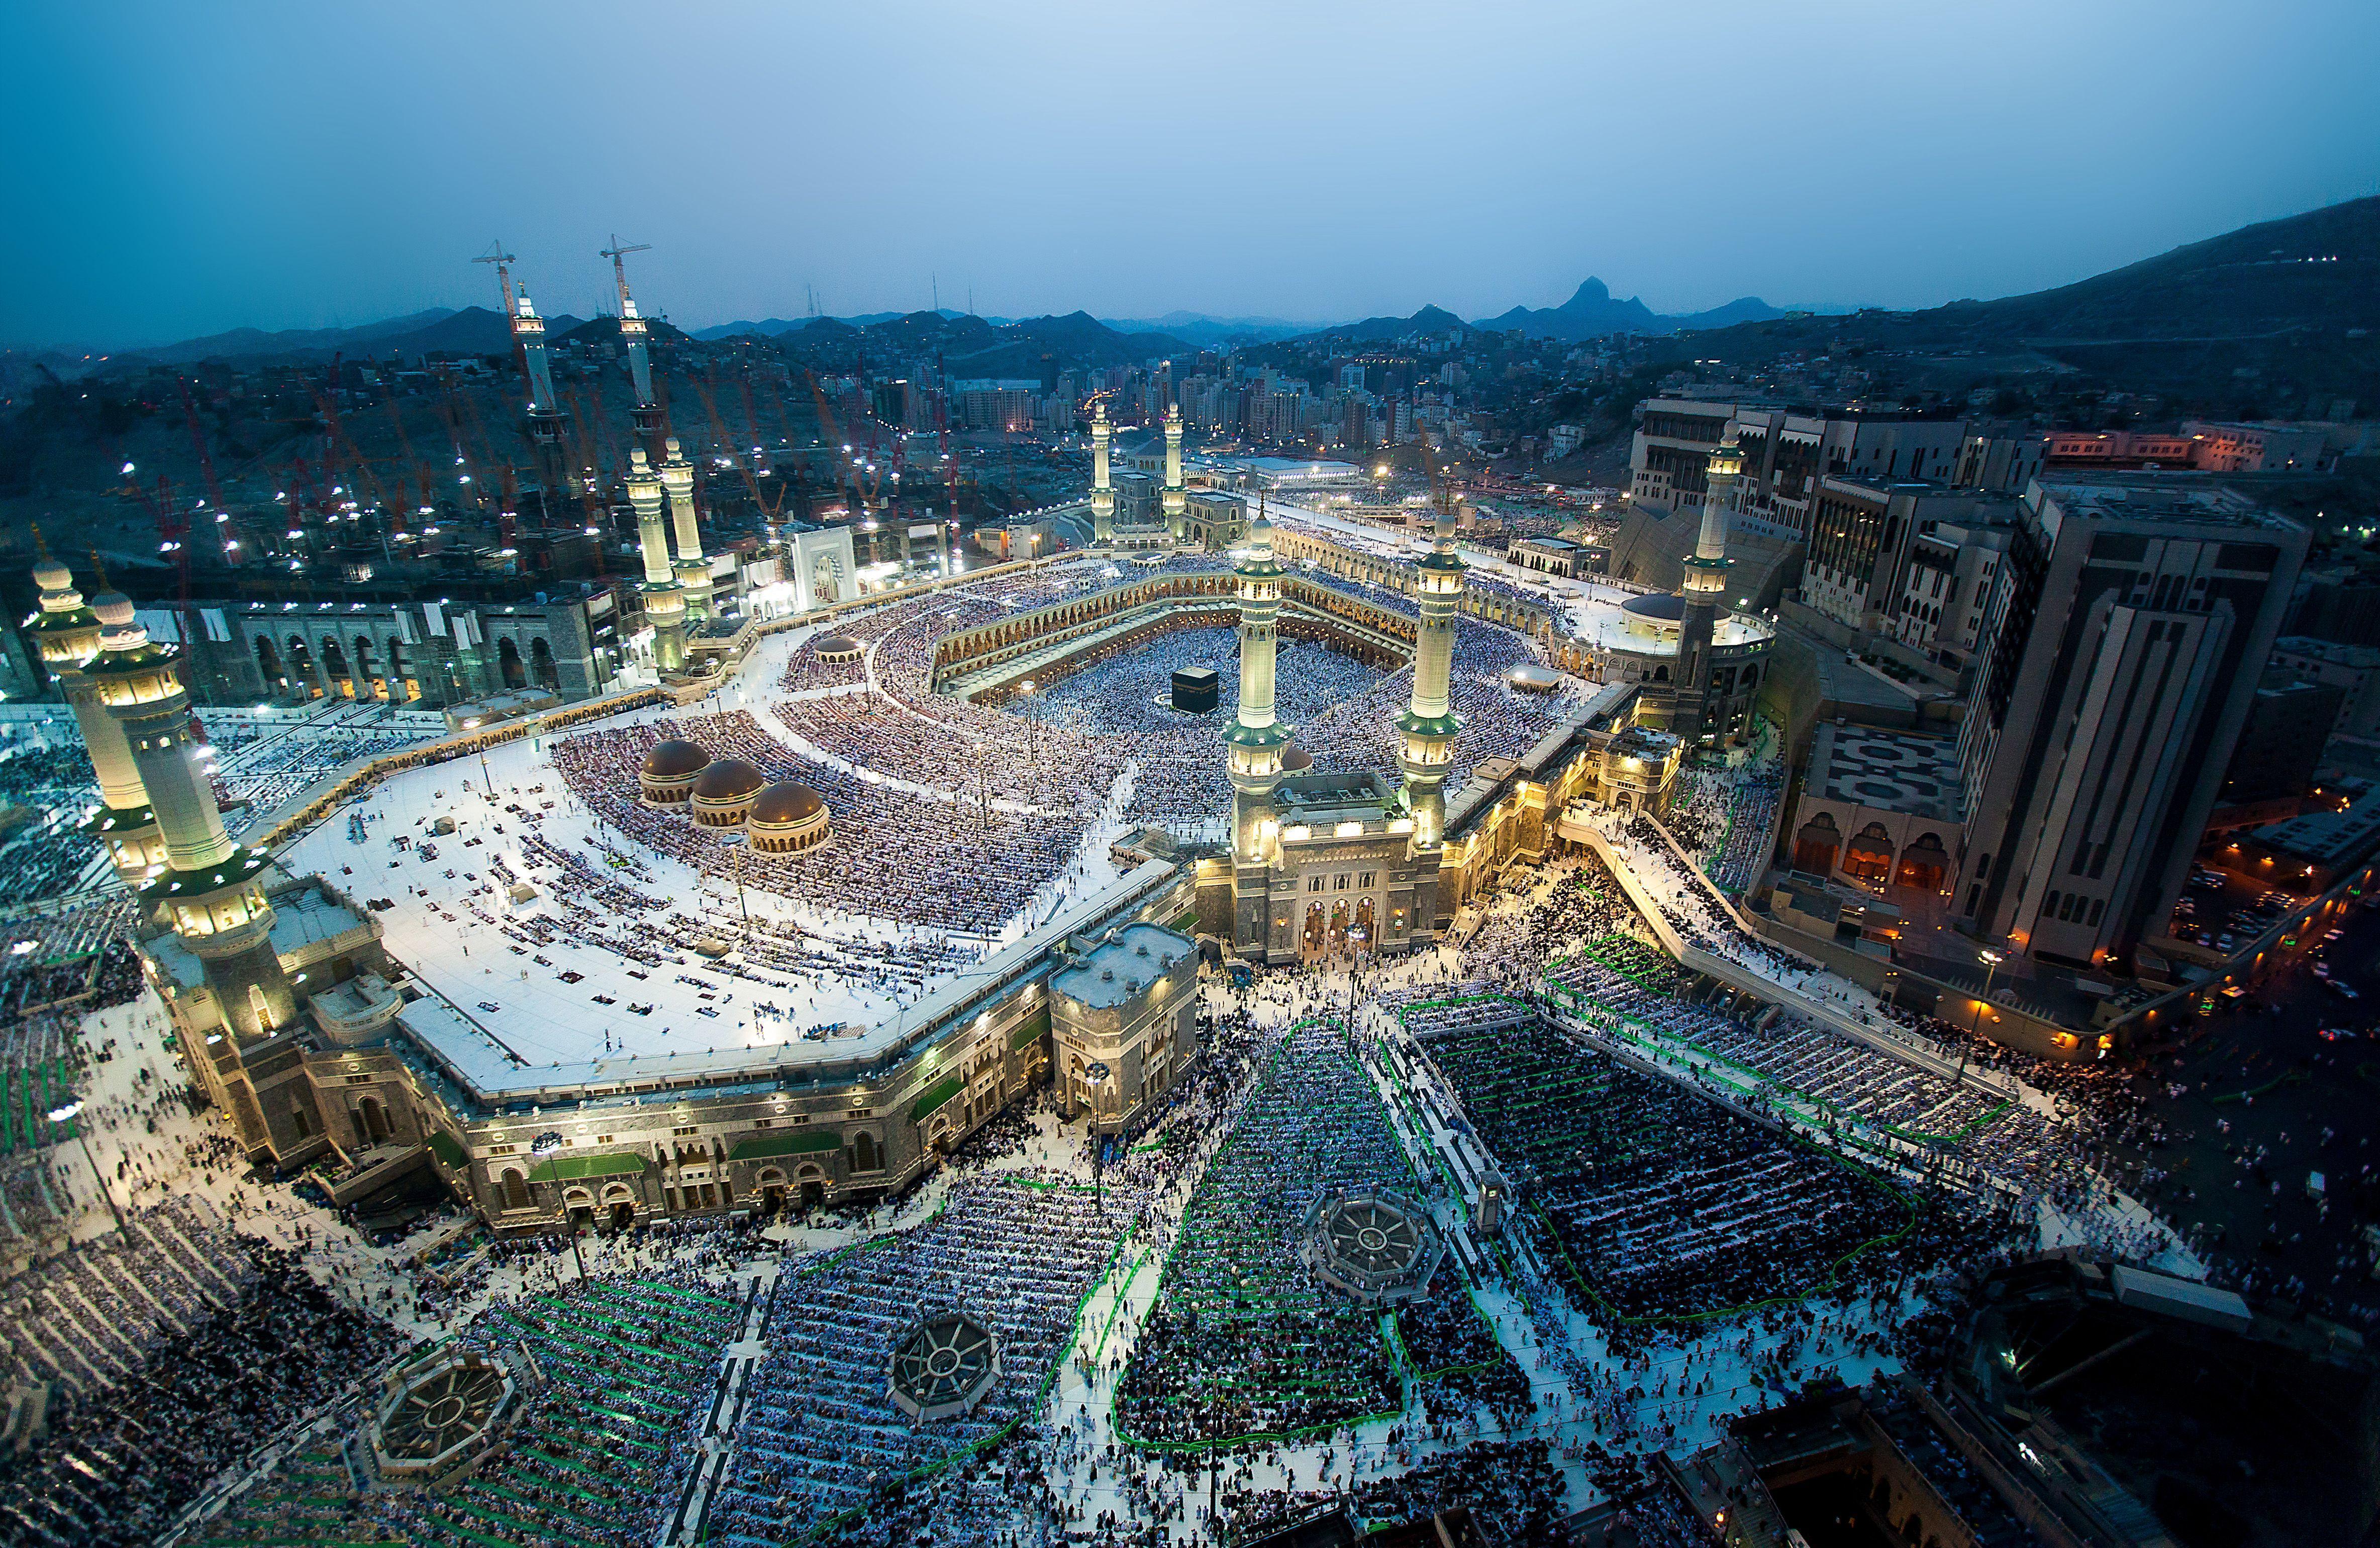 Holy Grand Mosque in Makkah /islamic